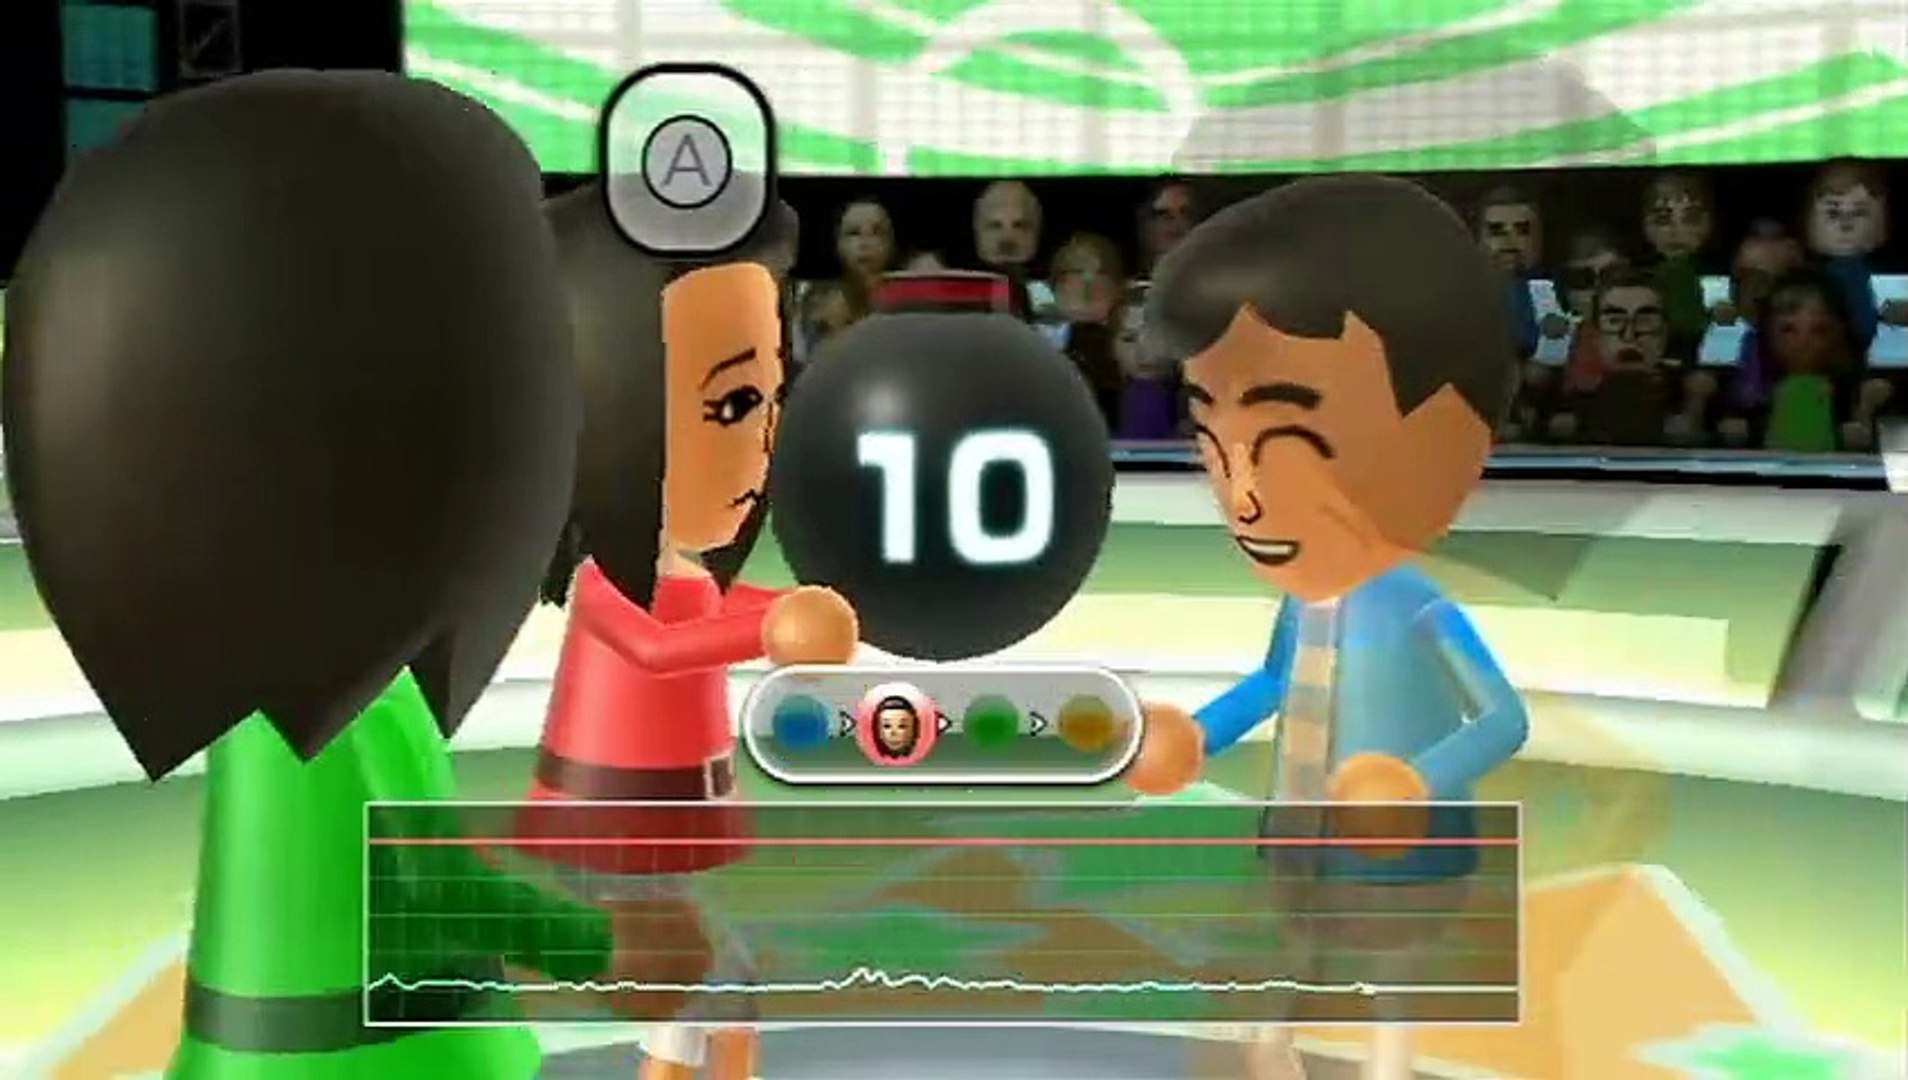 Wii Party: Gameplay Trailer - Vídeo Dailymotion